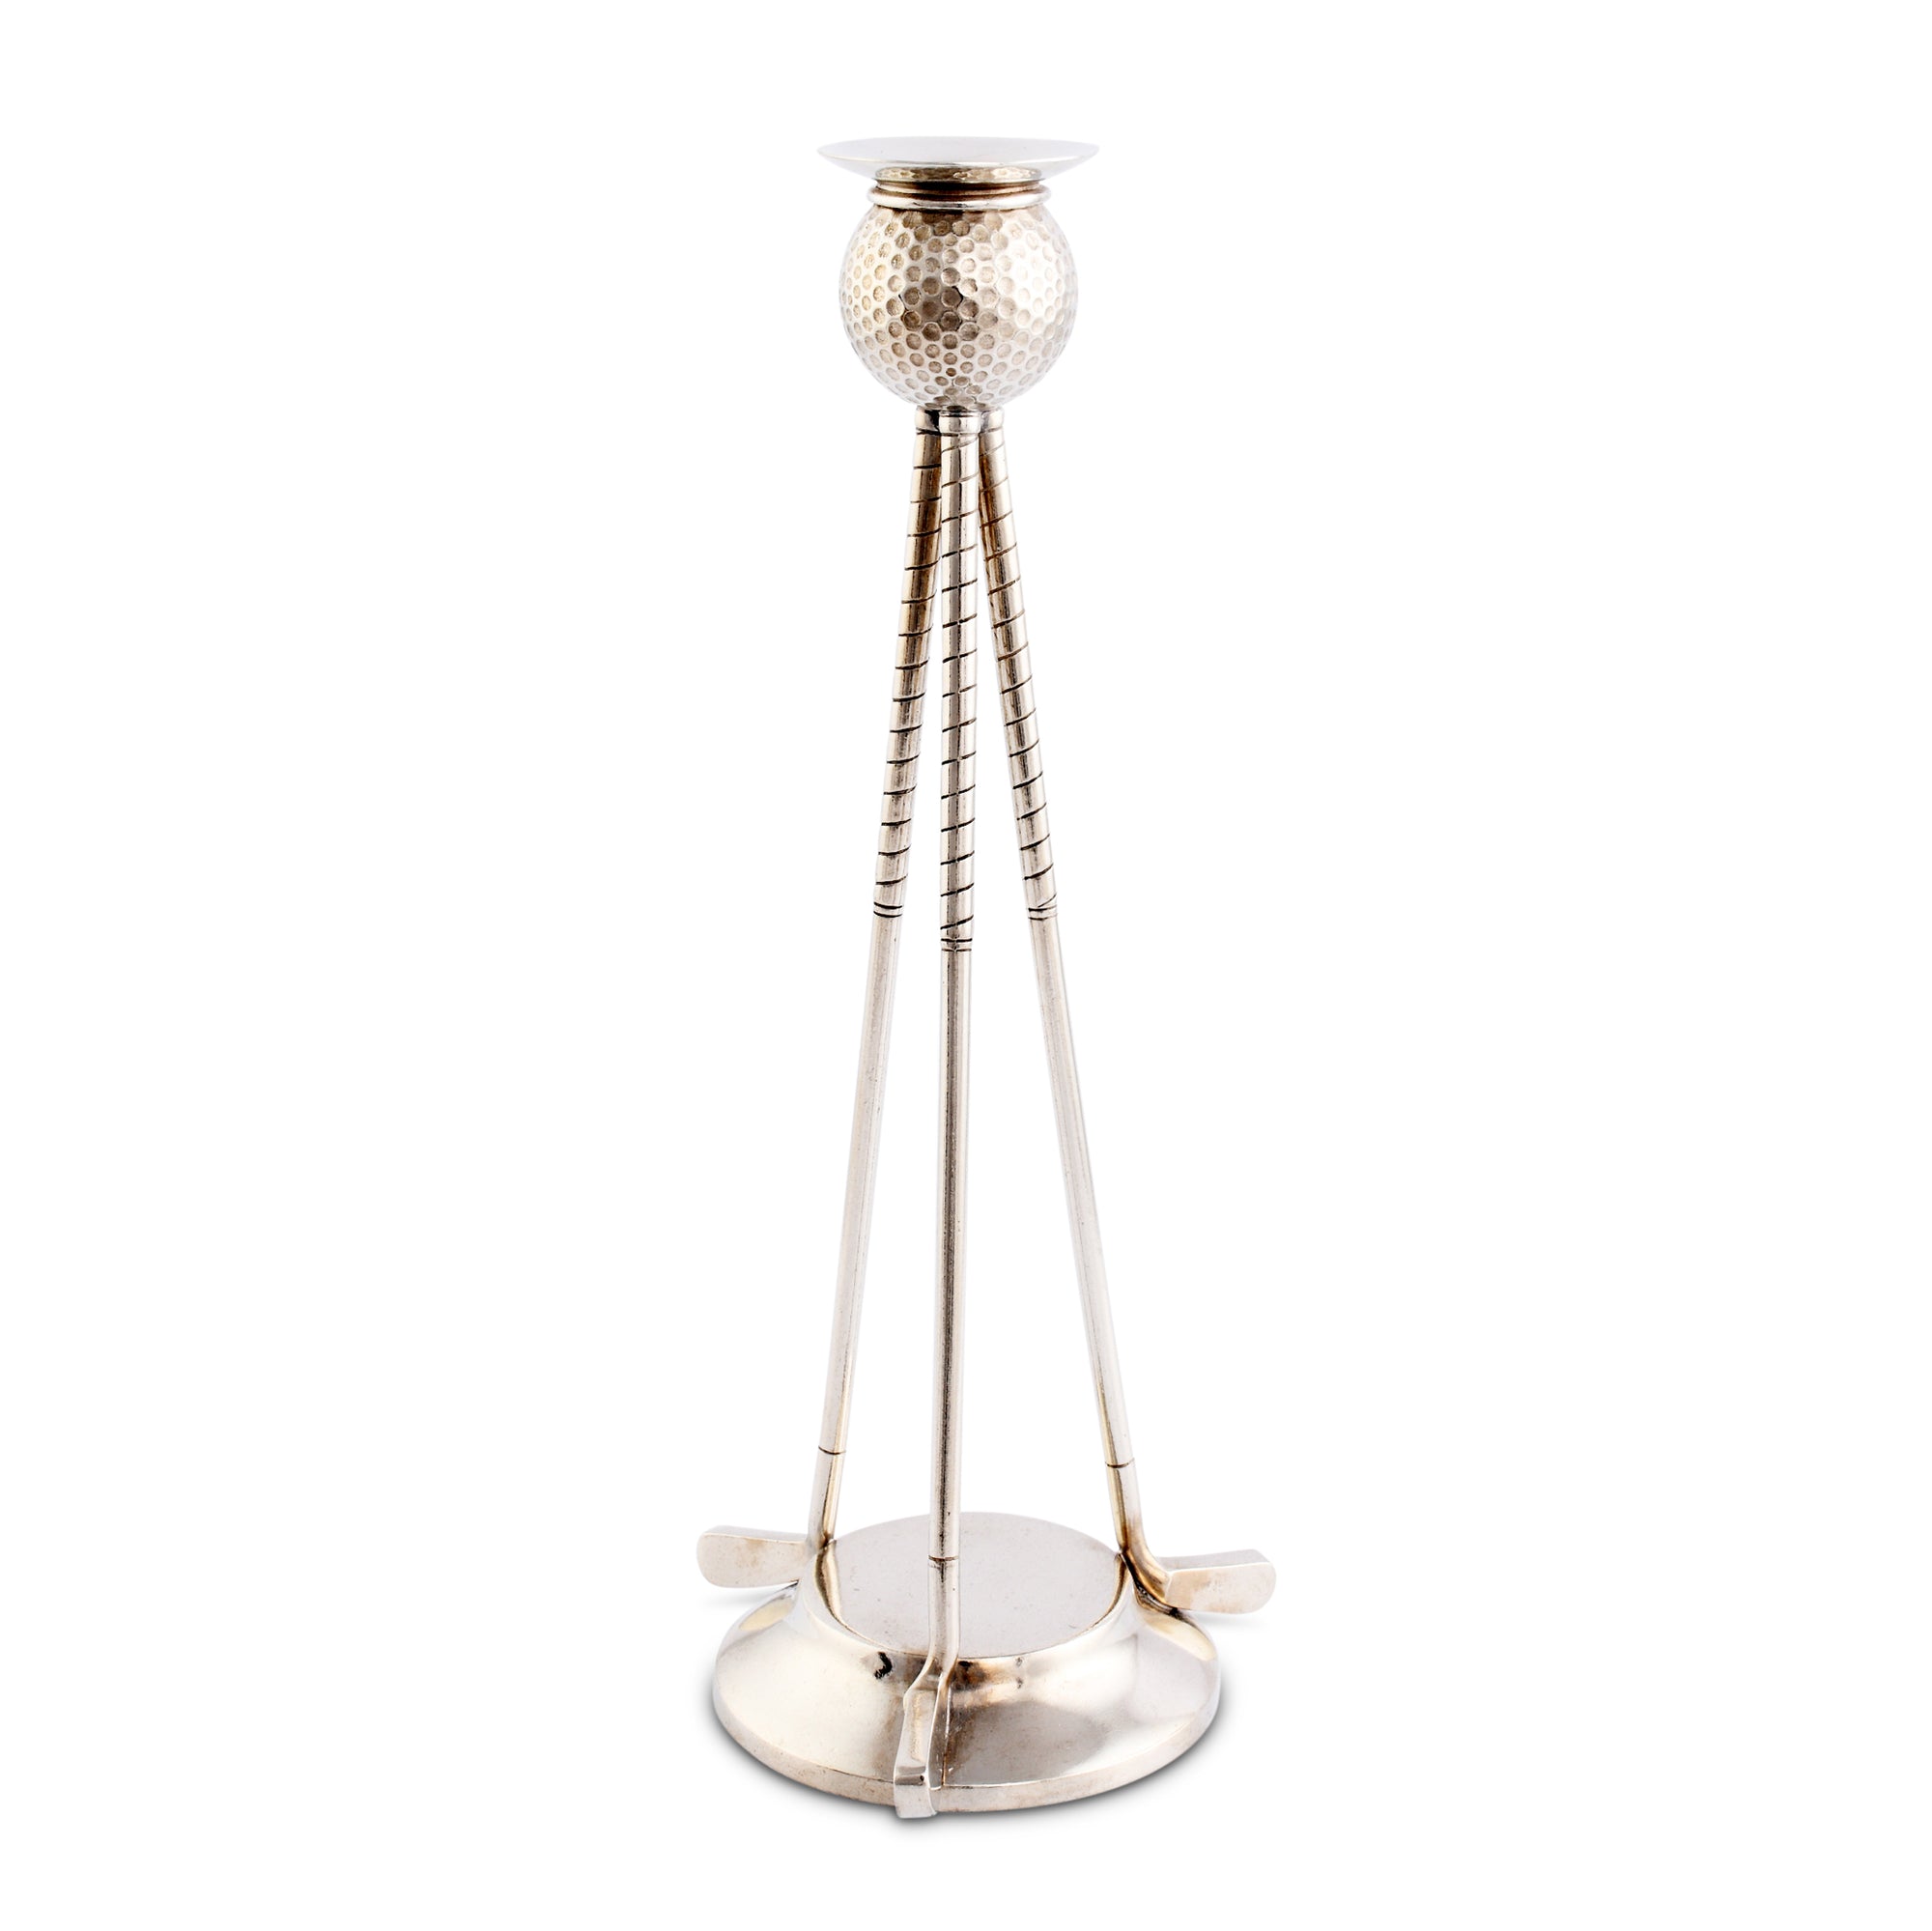 Vagabond House Golf Club Pewter Candlestick Product Image